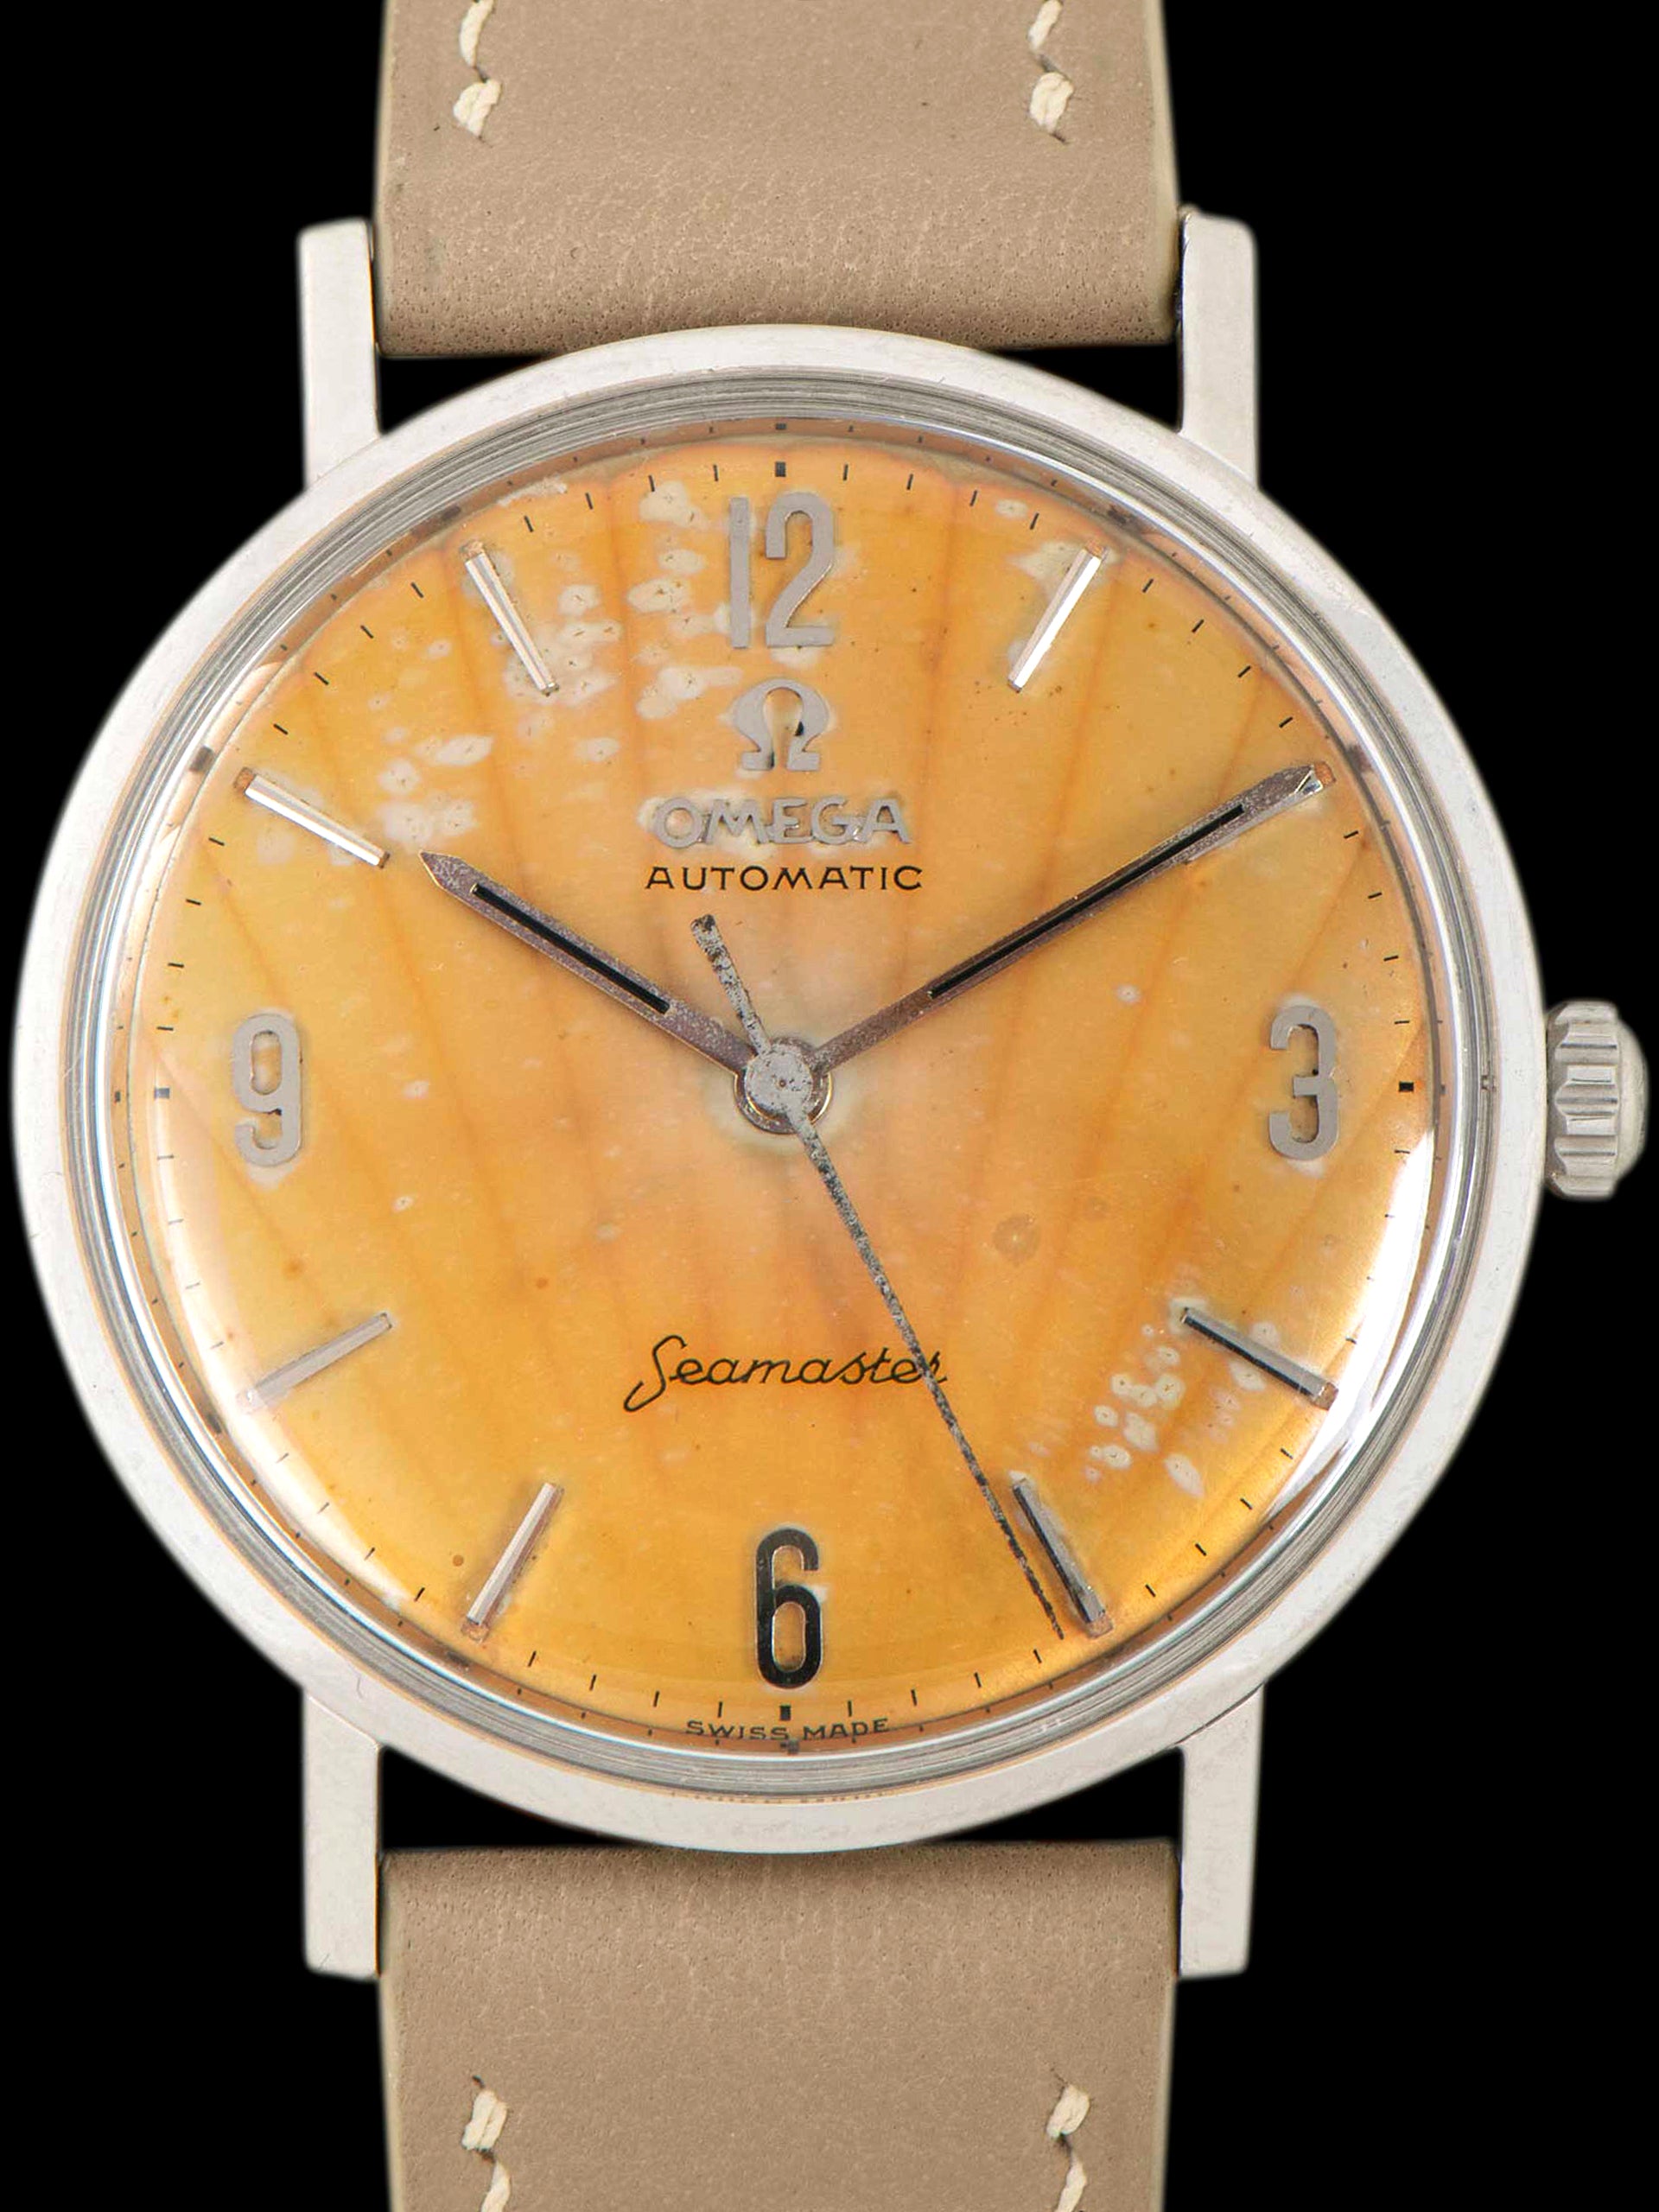 Tropical 1961 Omega Seamaster Automatic (Ref. 14765 SC-61) Cal. 550 "Clamshell Dial"